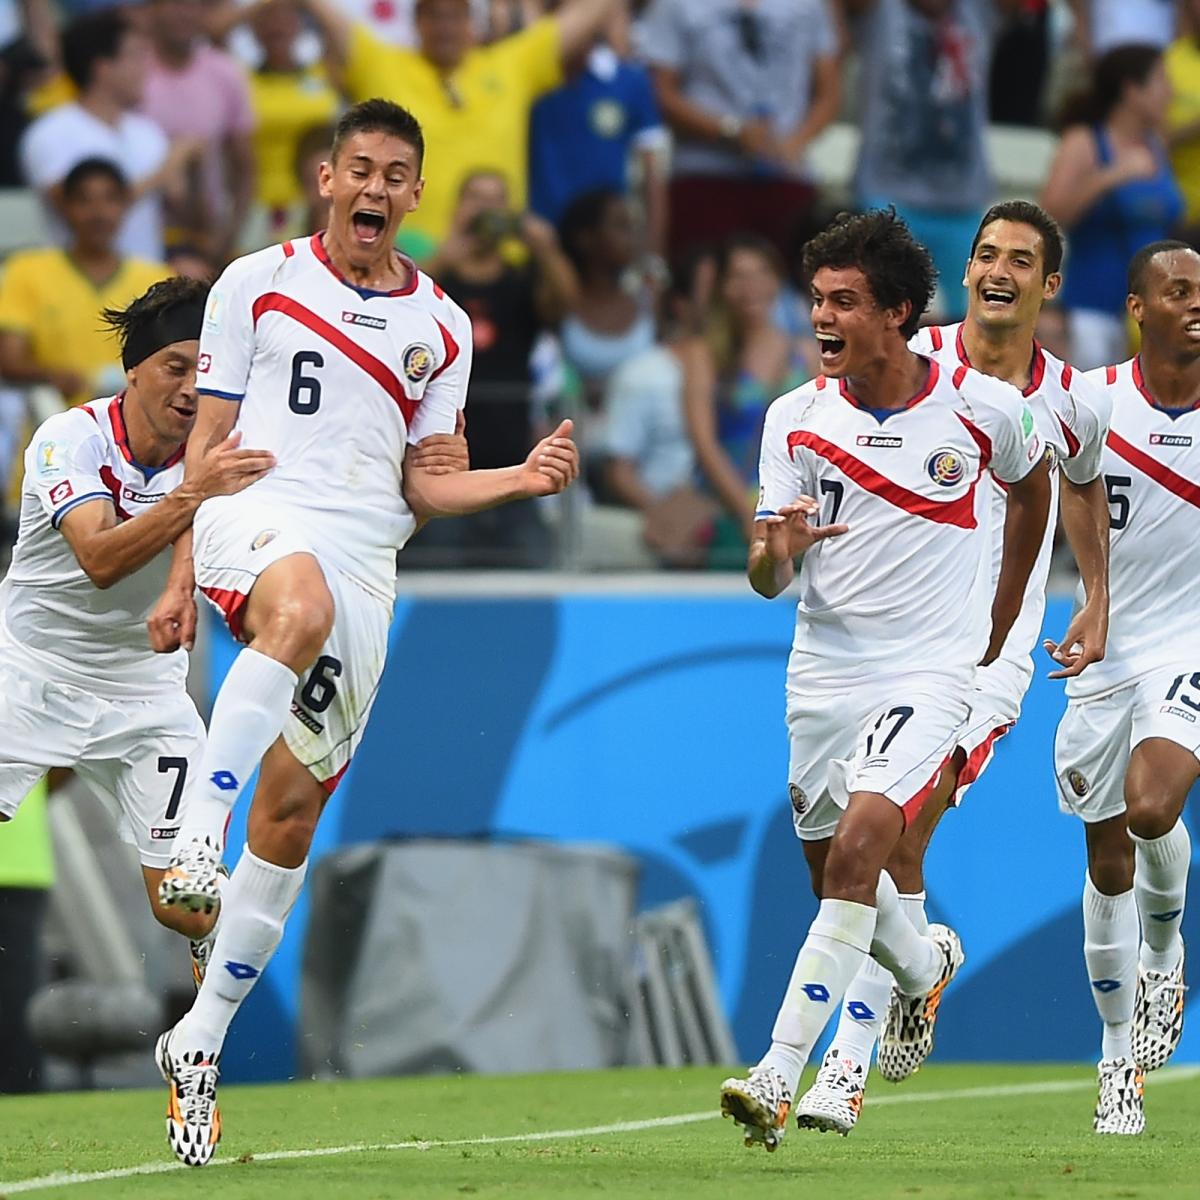 Twitter Reacts as Costa Rica Score 2 Goals in 3 Minutes vs. Uruguay